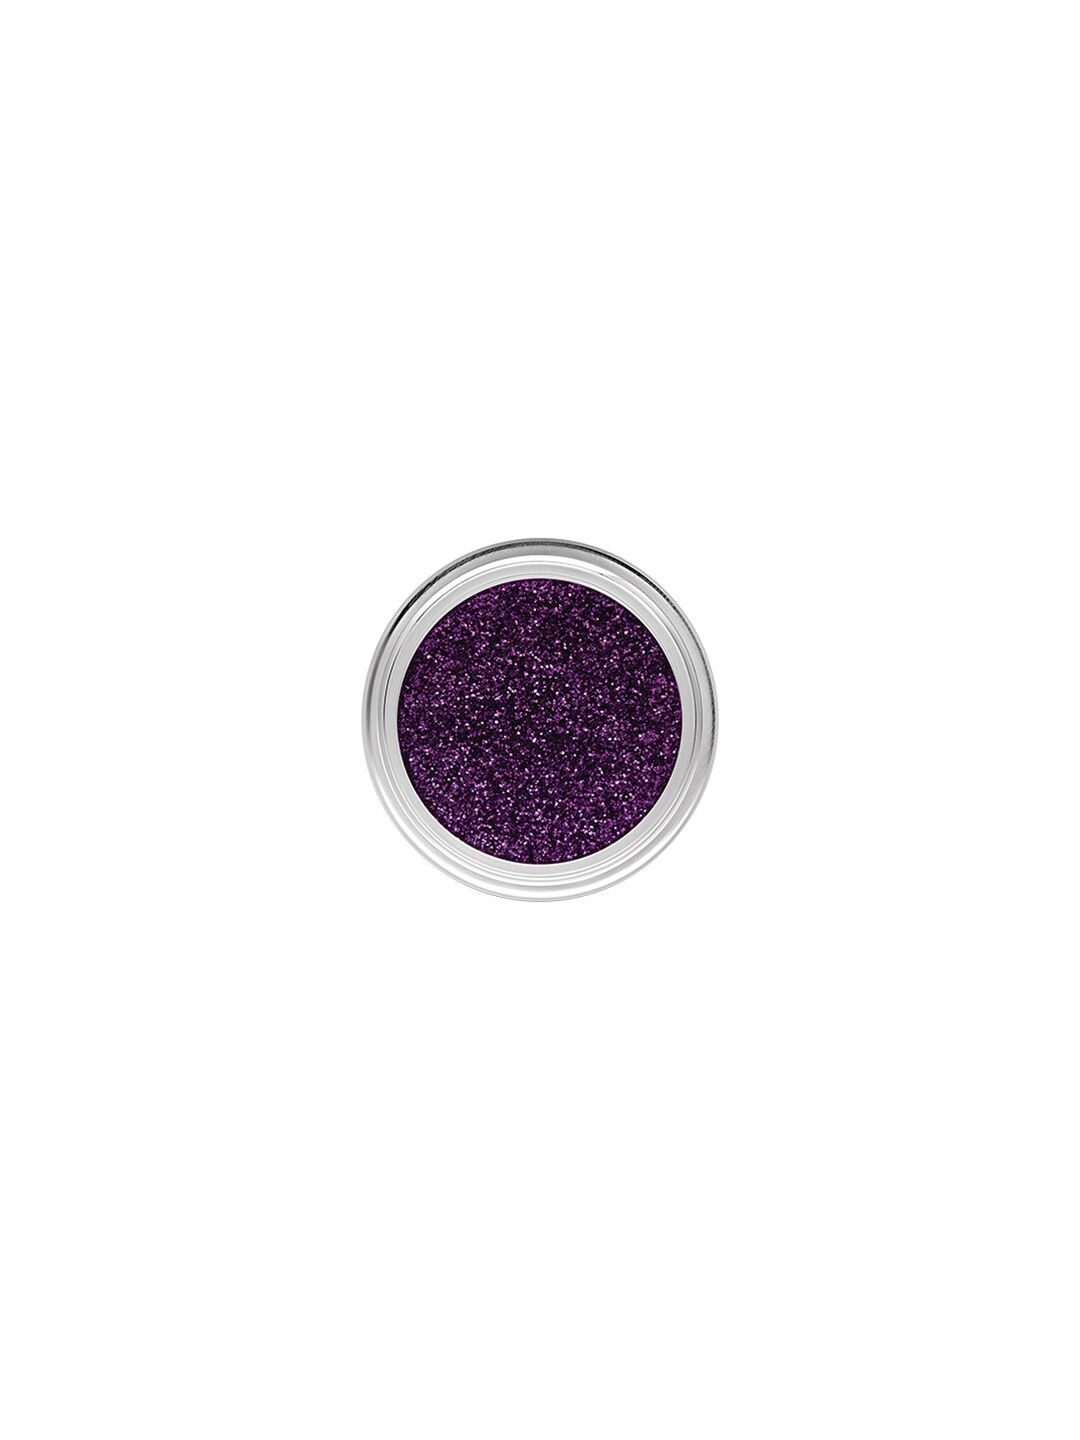 C2P PROFESSIONAL MAKEUP Uptown Loose Glitters Eyeshadow - Cyclone 40 Price in India